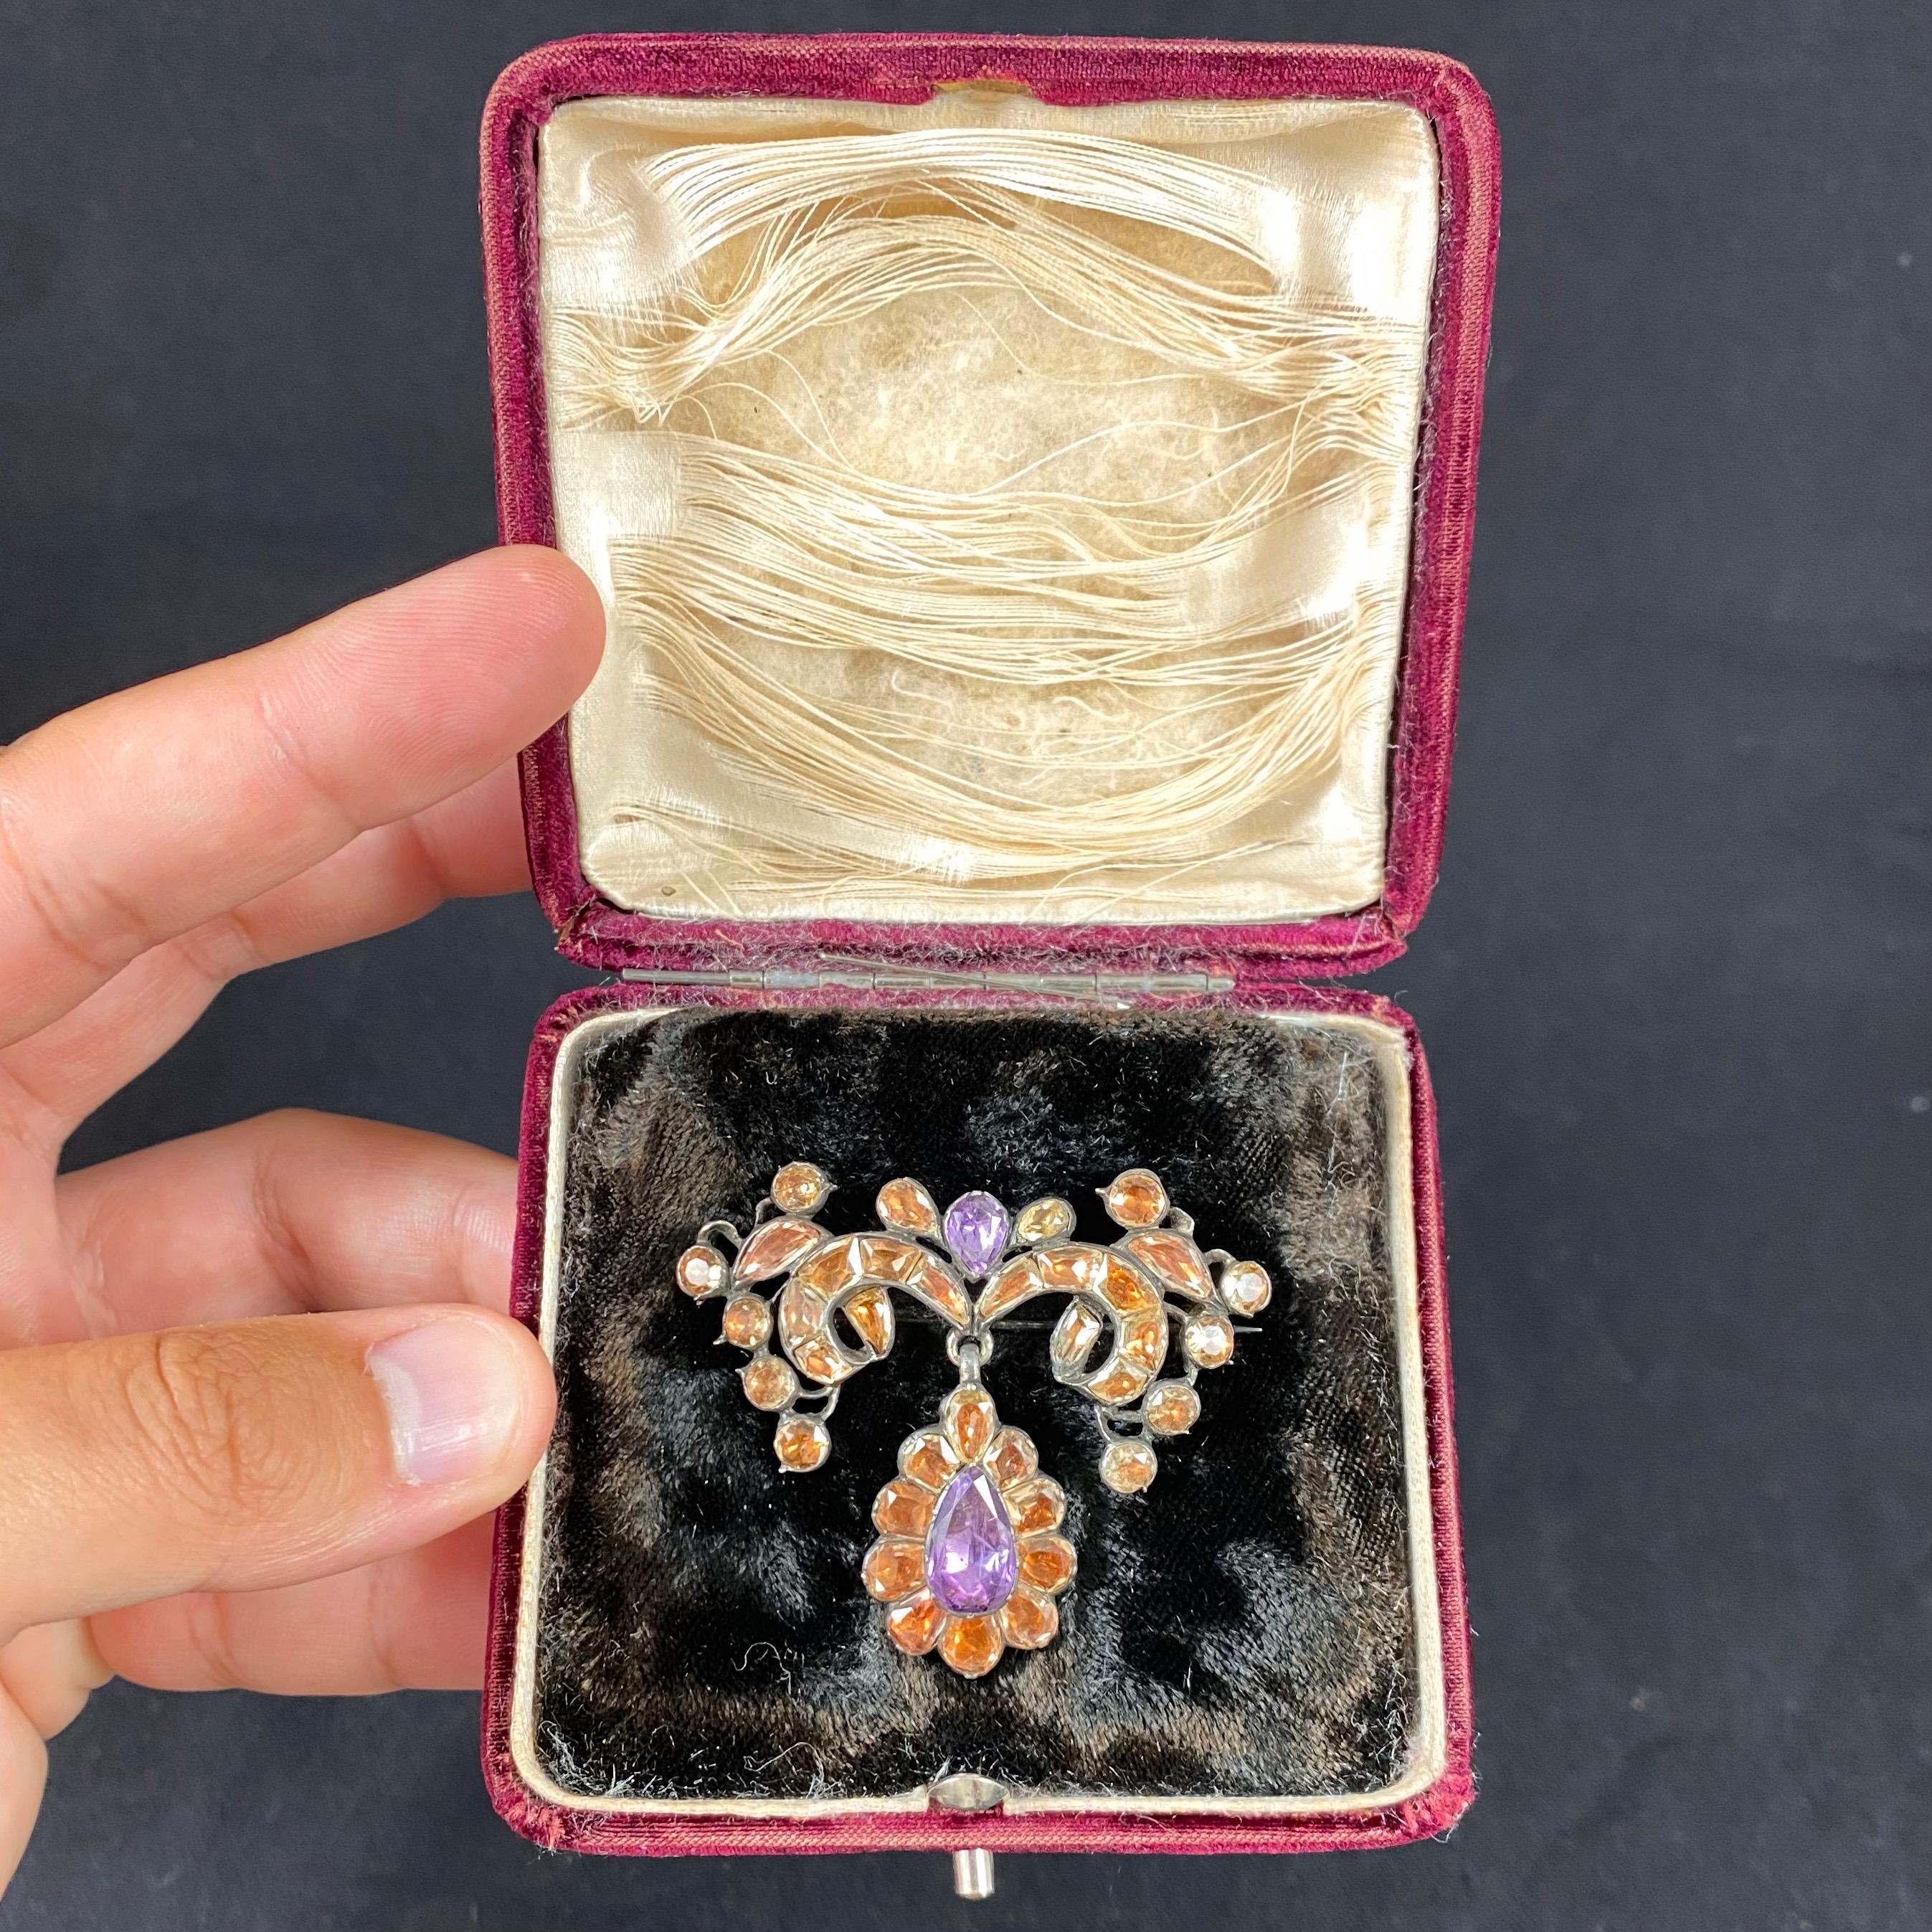 An antique 18th century foiled imperial topaz and amethyst brooch in silver, Portuguese, circa 1770. From the Georgian period, this brooch is designed as two openwork scrolled foliate branches issuing from the center, where hangs an articulated